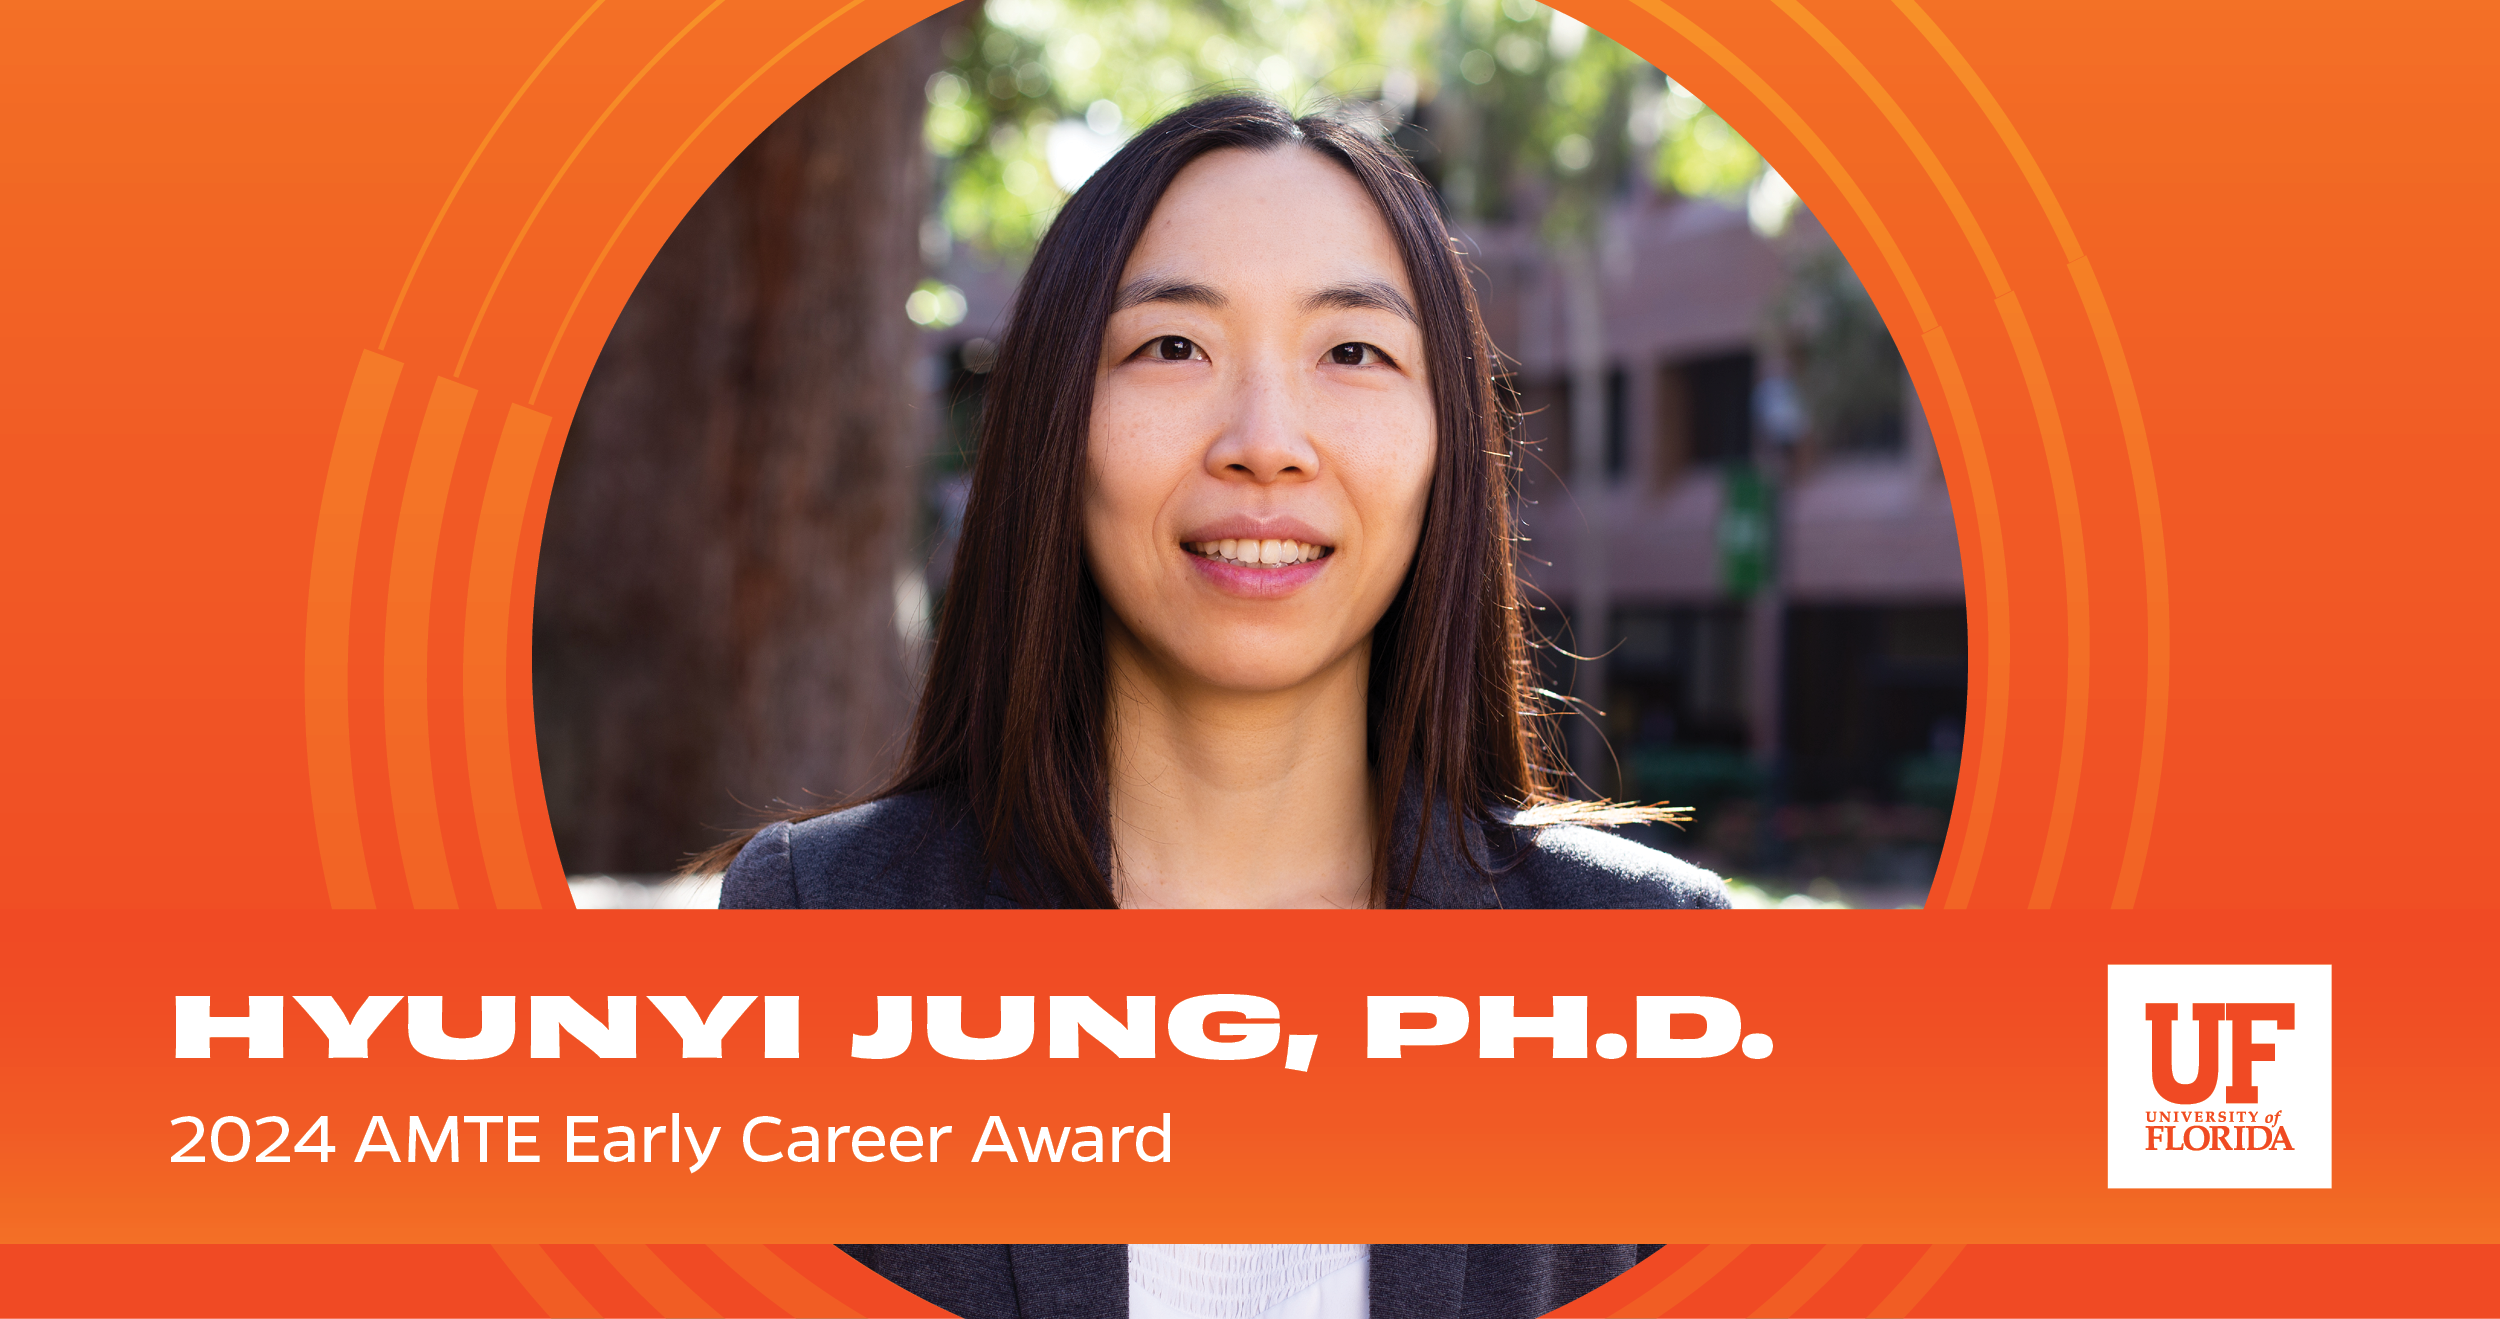 An orange graphic that contains the words "Hyunyi Jung, Ph.D. 2024 AMTE Early Career Award," along with a headshot of Dr. Jung. There is UF momentum branding that accompanies the image, as well as the UF logo in white.